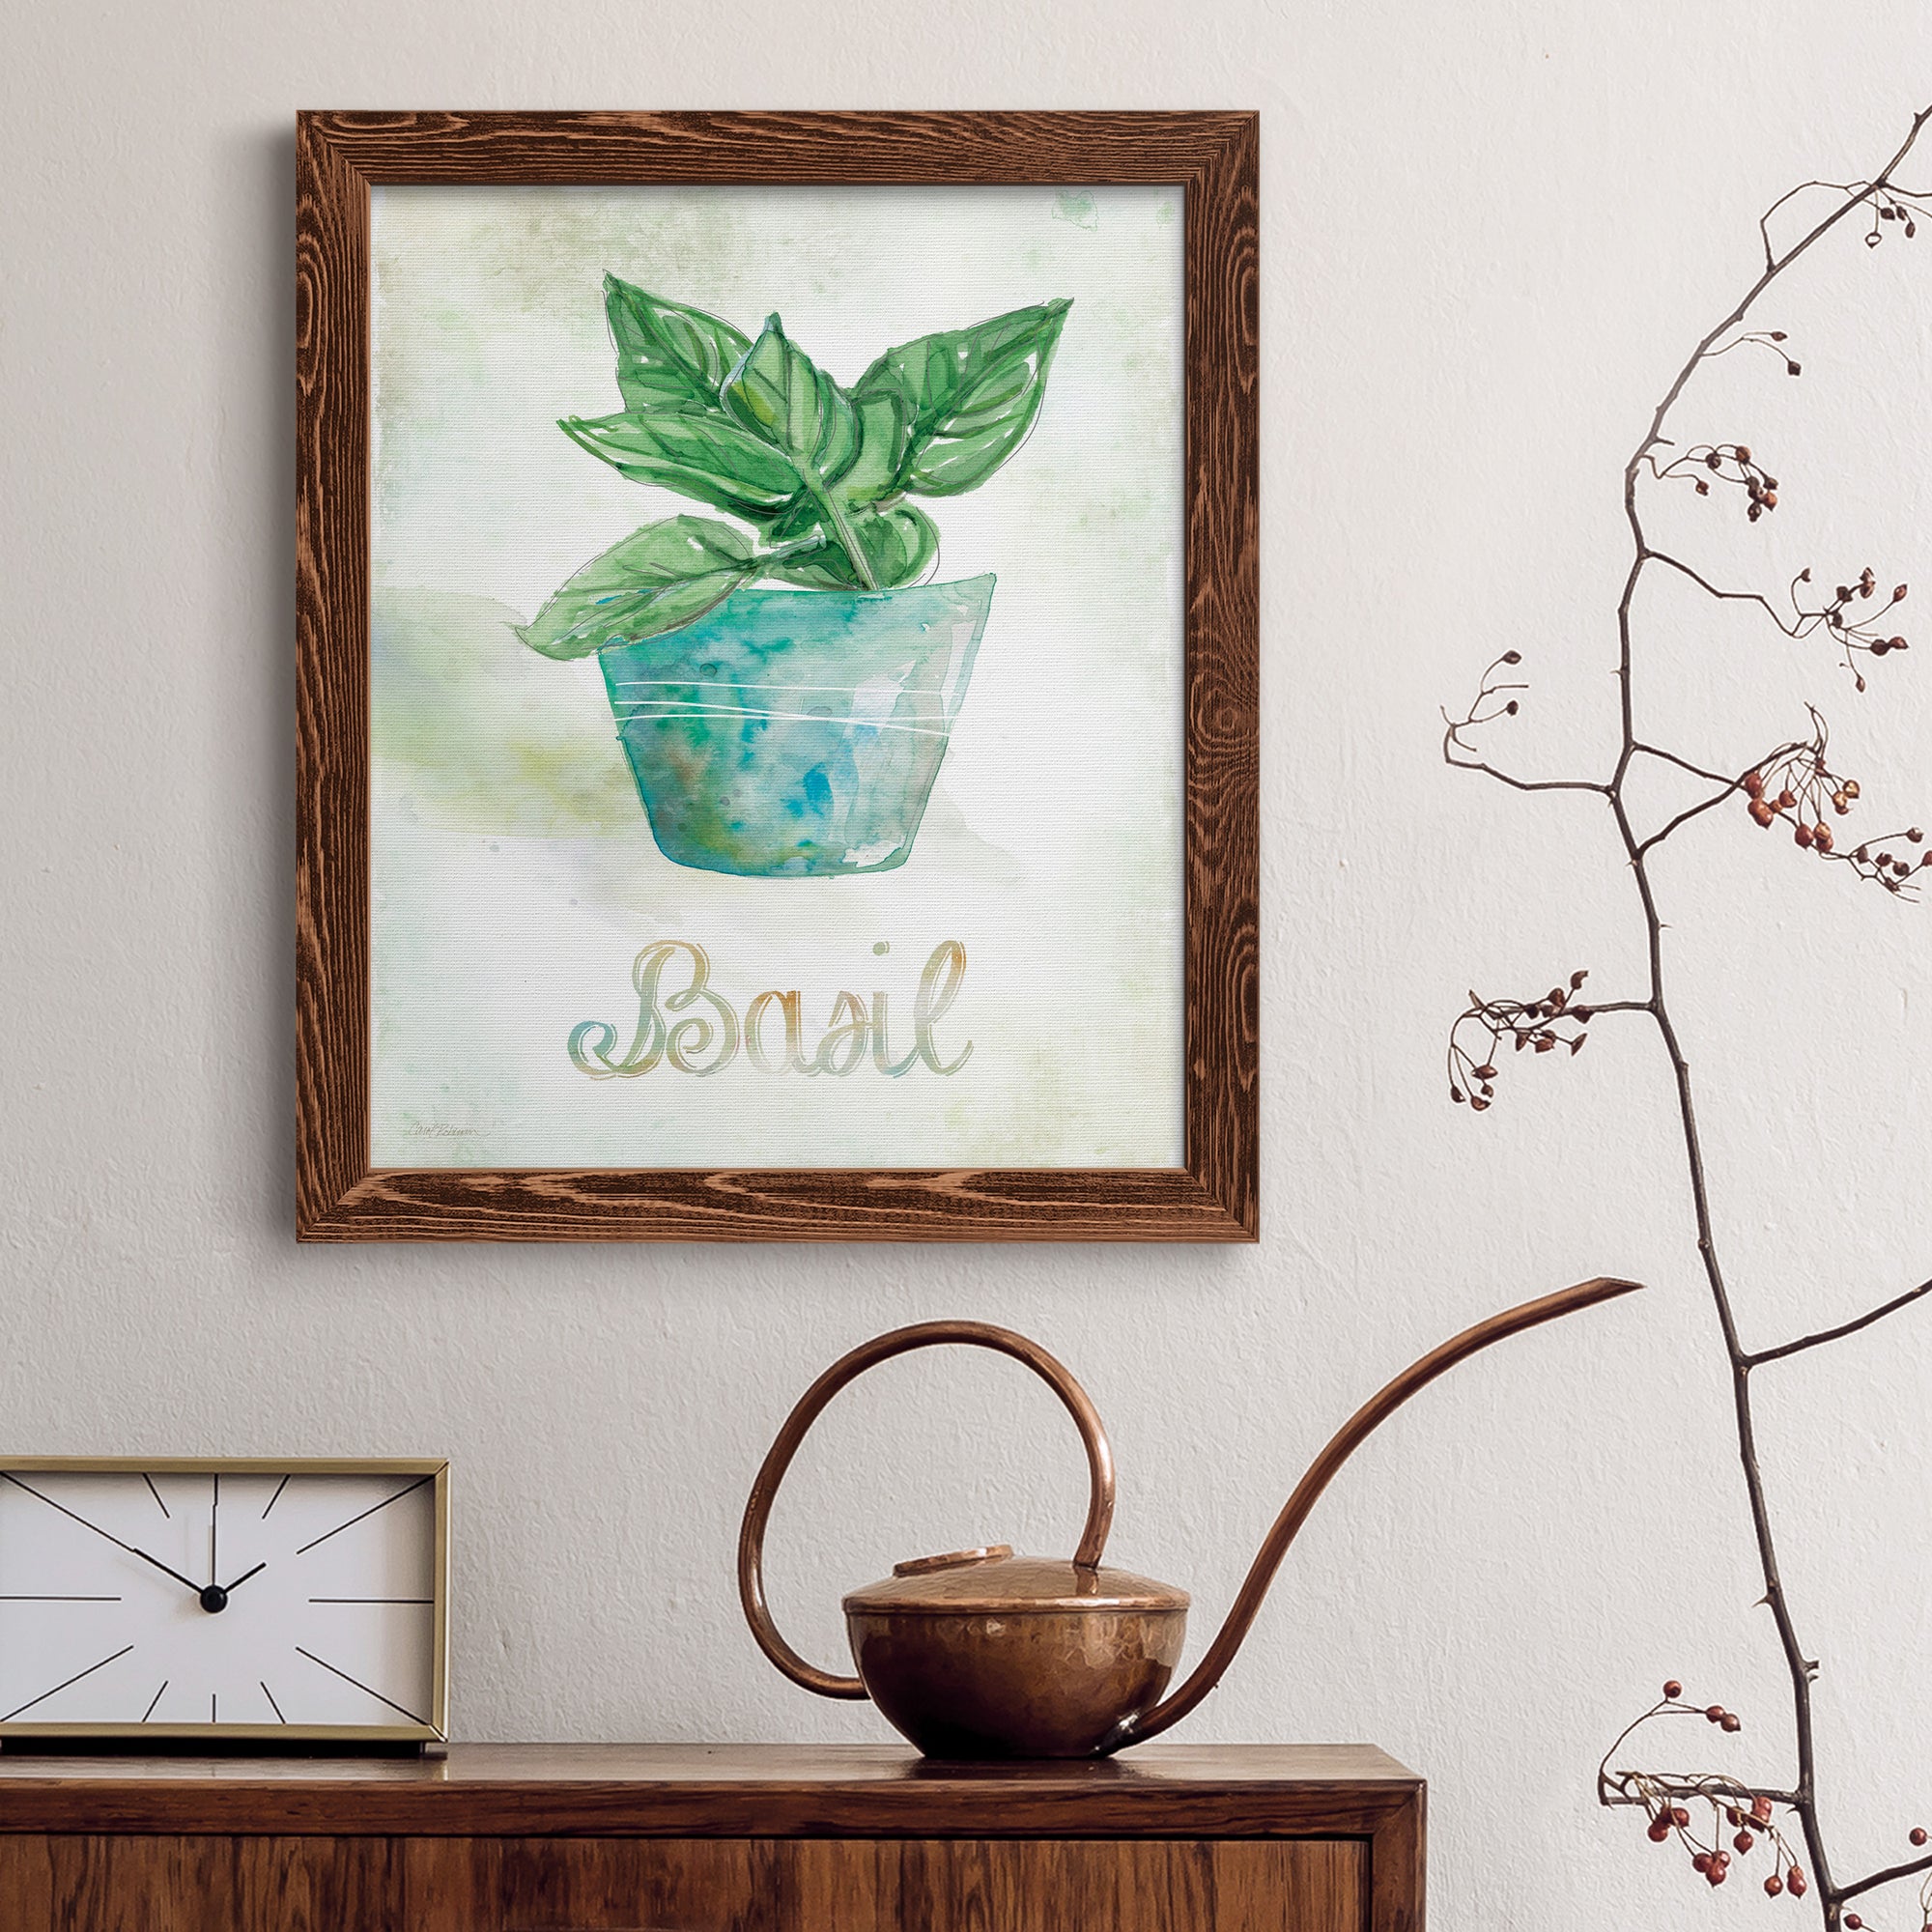 Potted Basil - Premium Canvas Framed in Barnwood - Ready to Hang